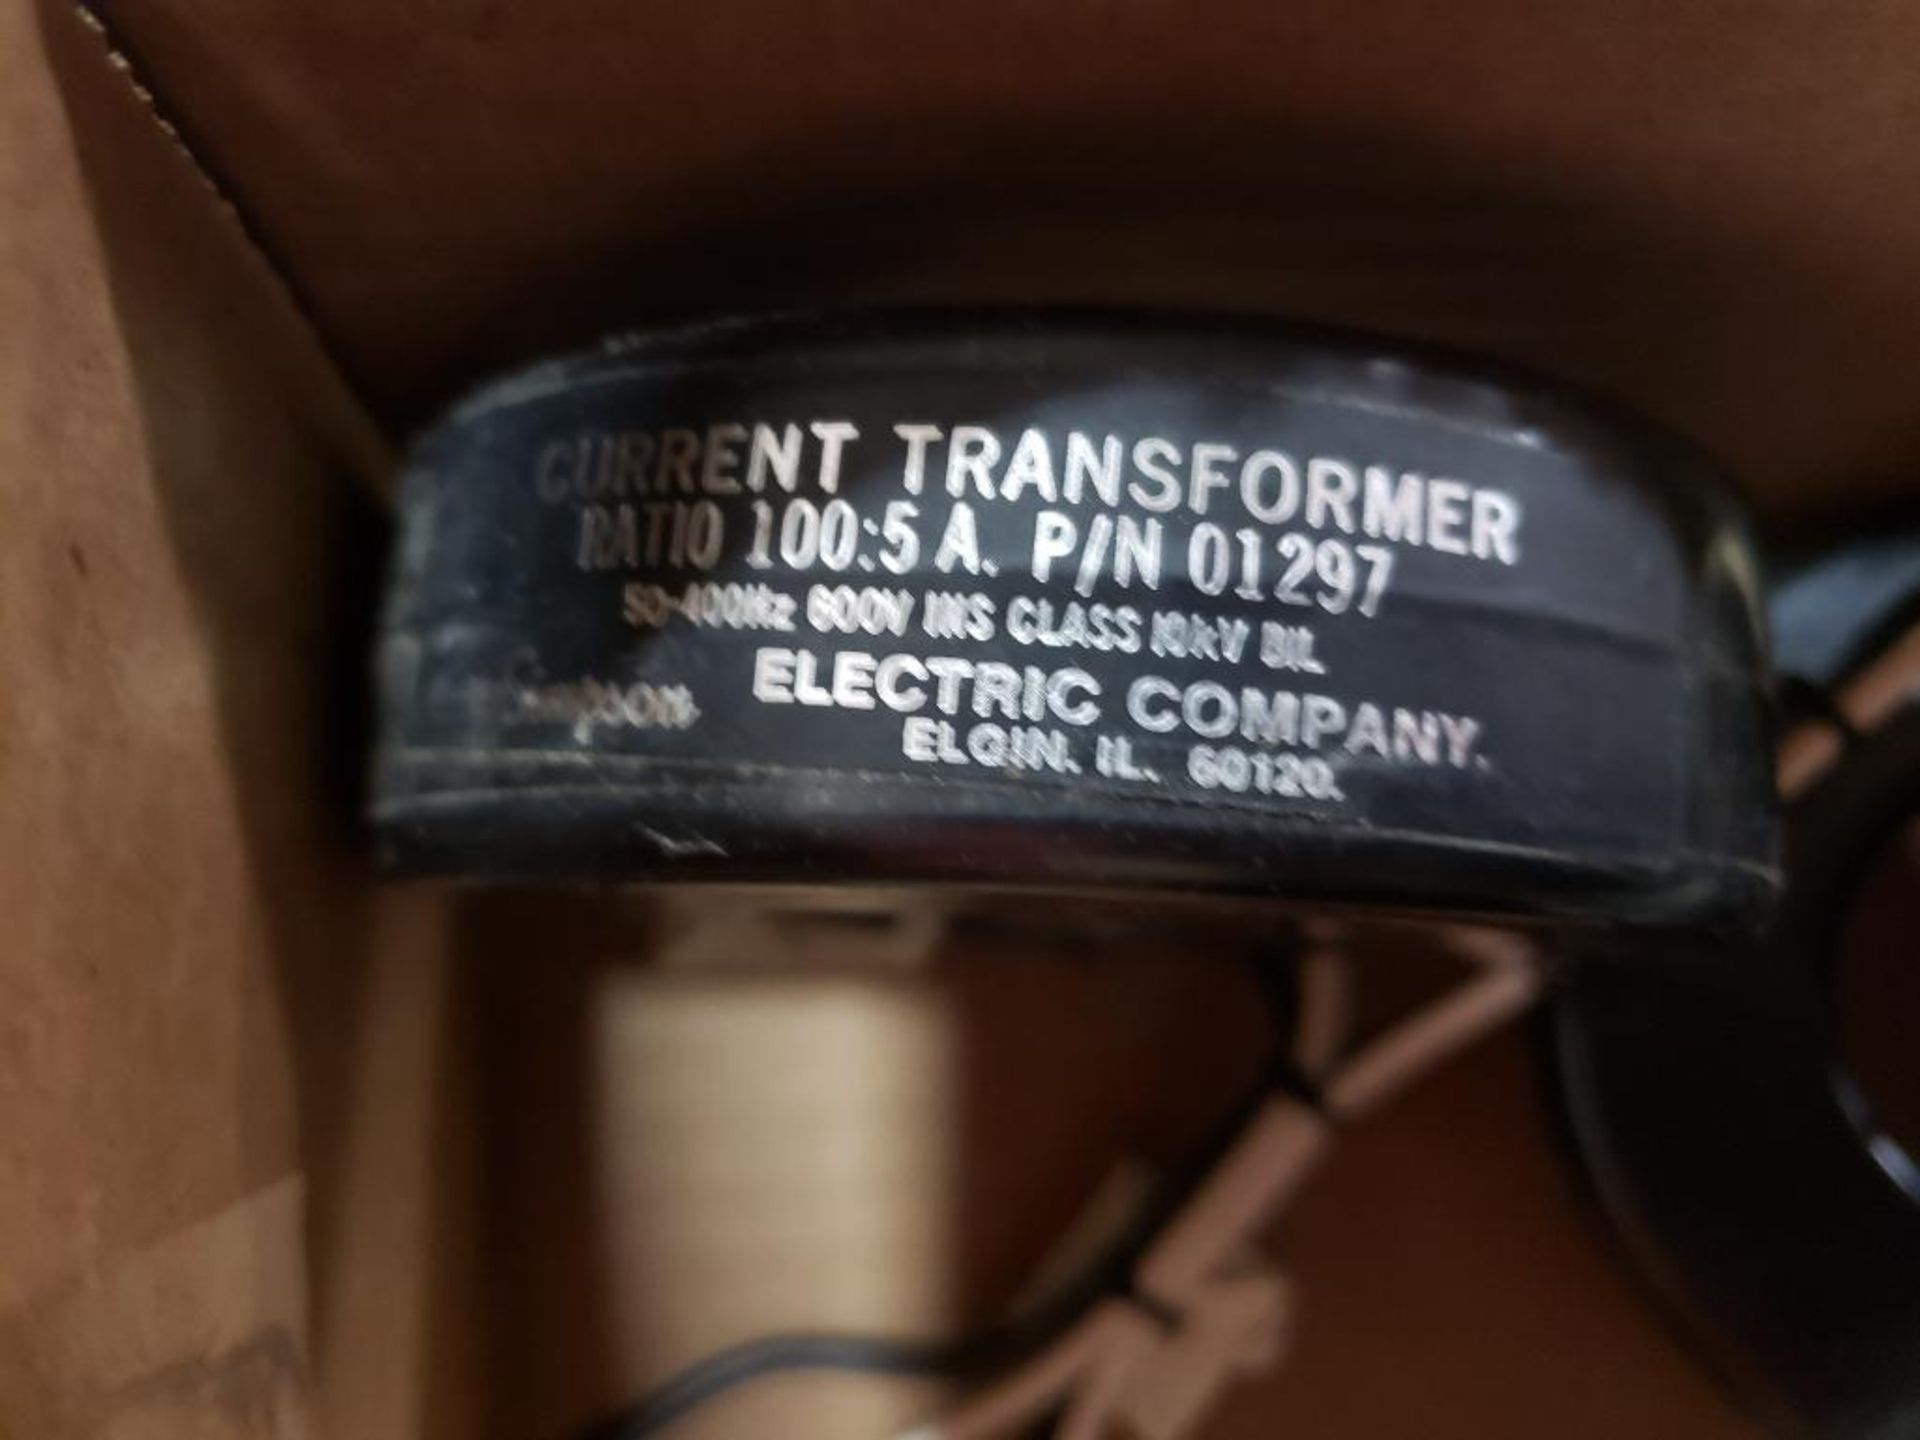 Qty 6 - Assorted current transformer. Simpson, WICC LTD. - Image 4 of 5